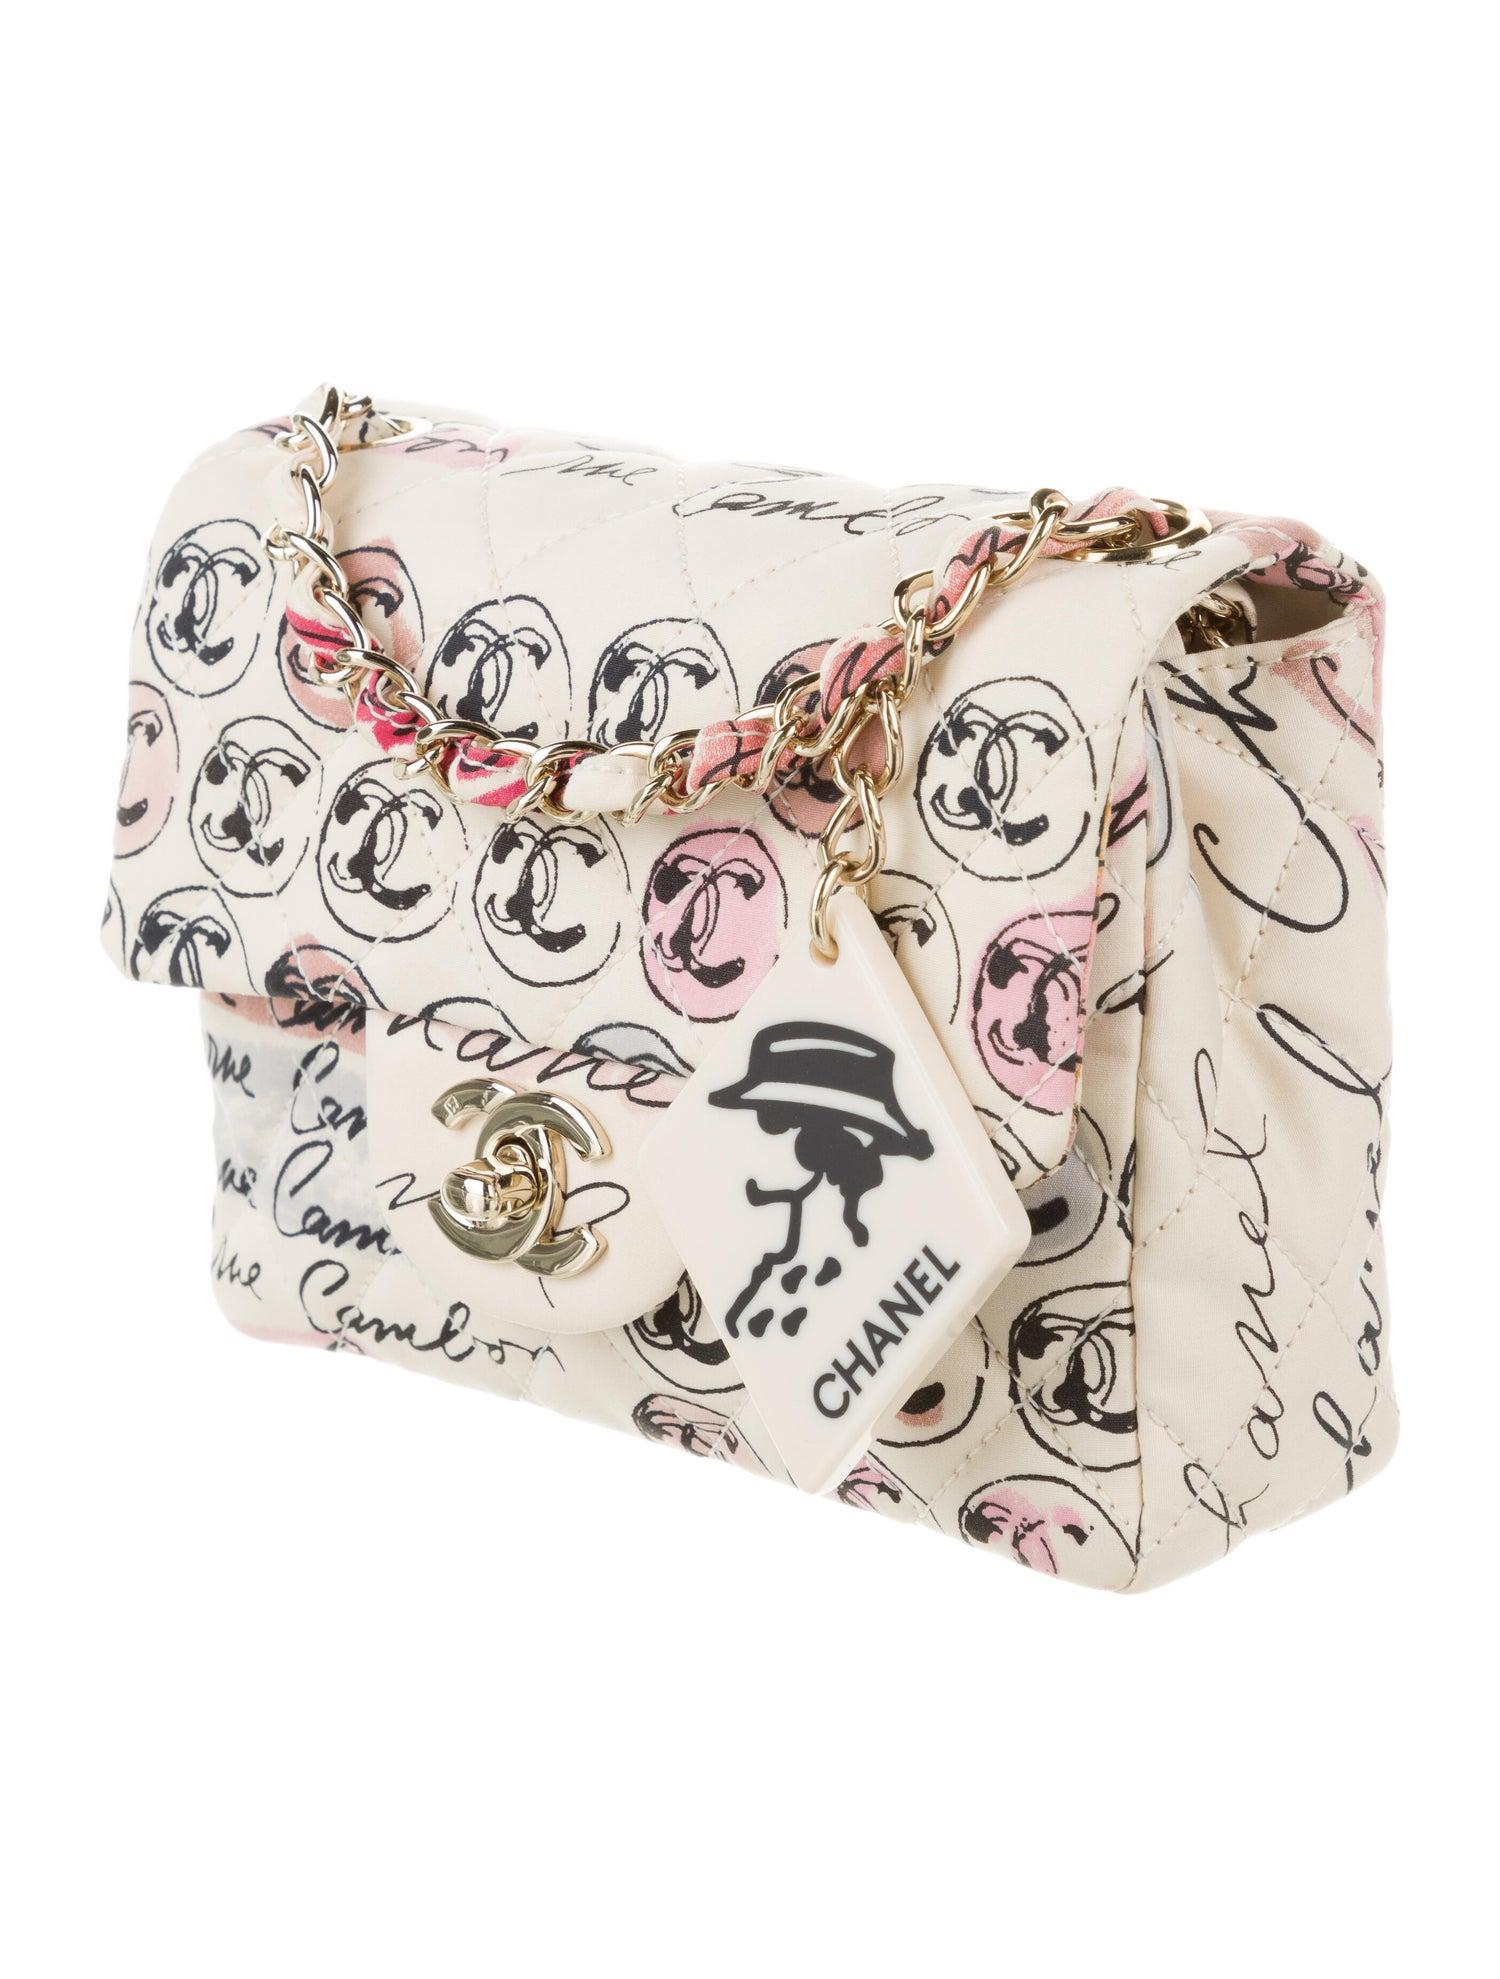 Chanel Vintage Graffiti Creme & Multicolor Mini Square CC Logo Print Flap Bag

From the Spring 2006 Collection. 
Creme and multicolor CC logo print quilted canvas Chanel Coco Mini Square Flap bag with gold-tone hardware, single chain-link and canvas